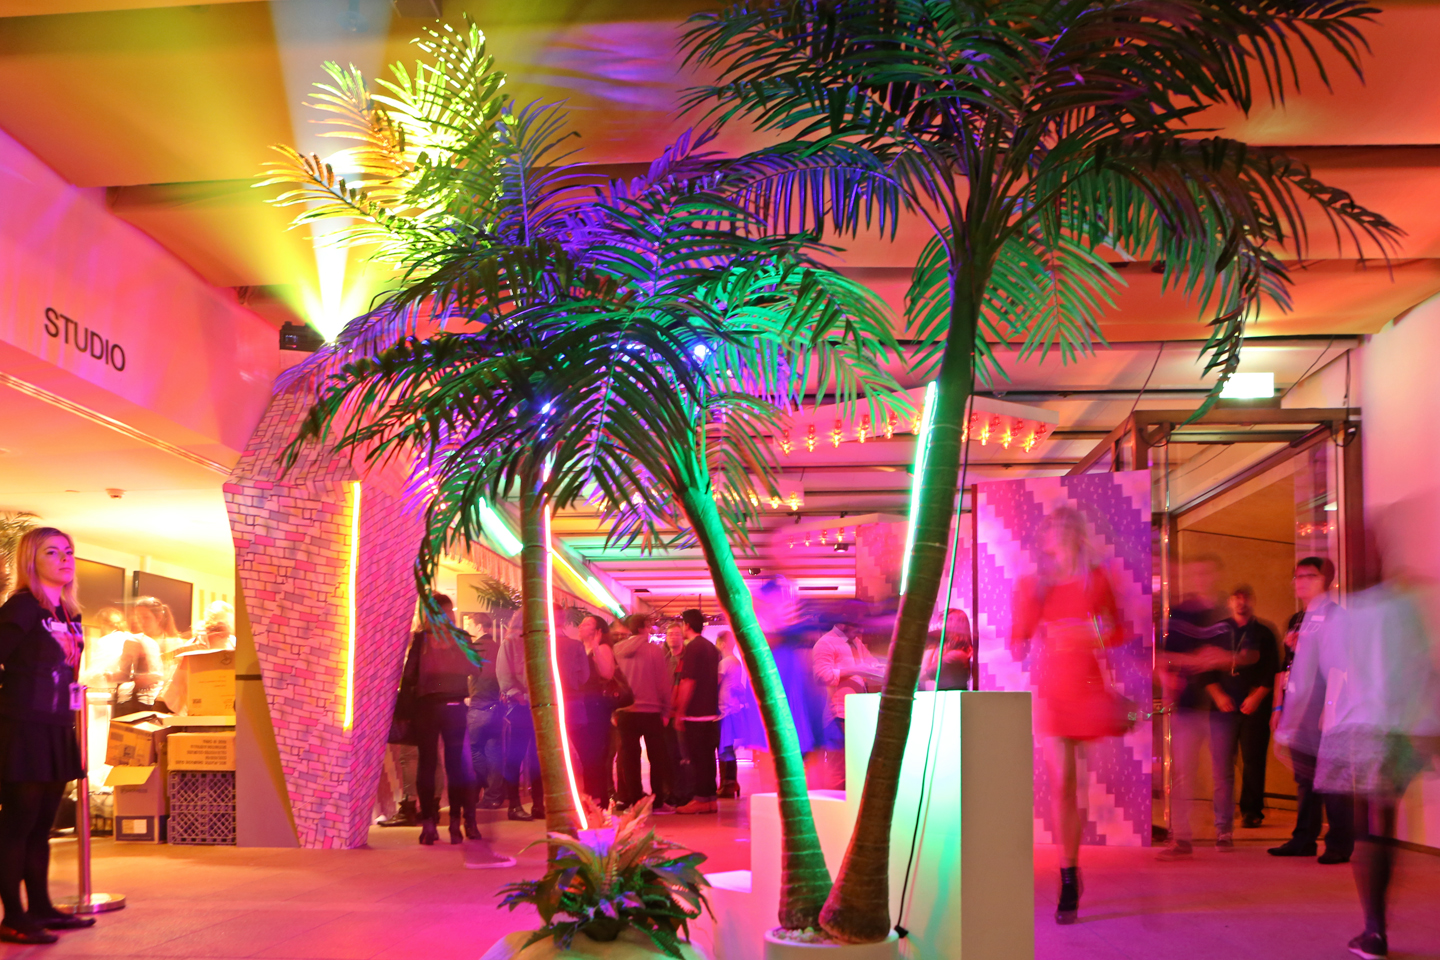 A neon pink lit studio with palm trees.